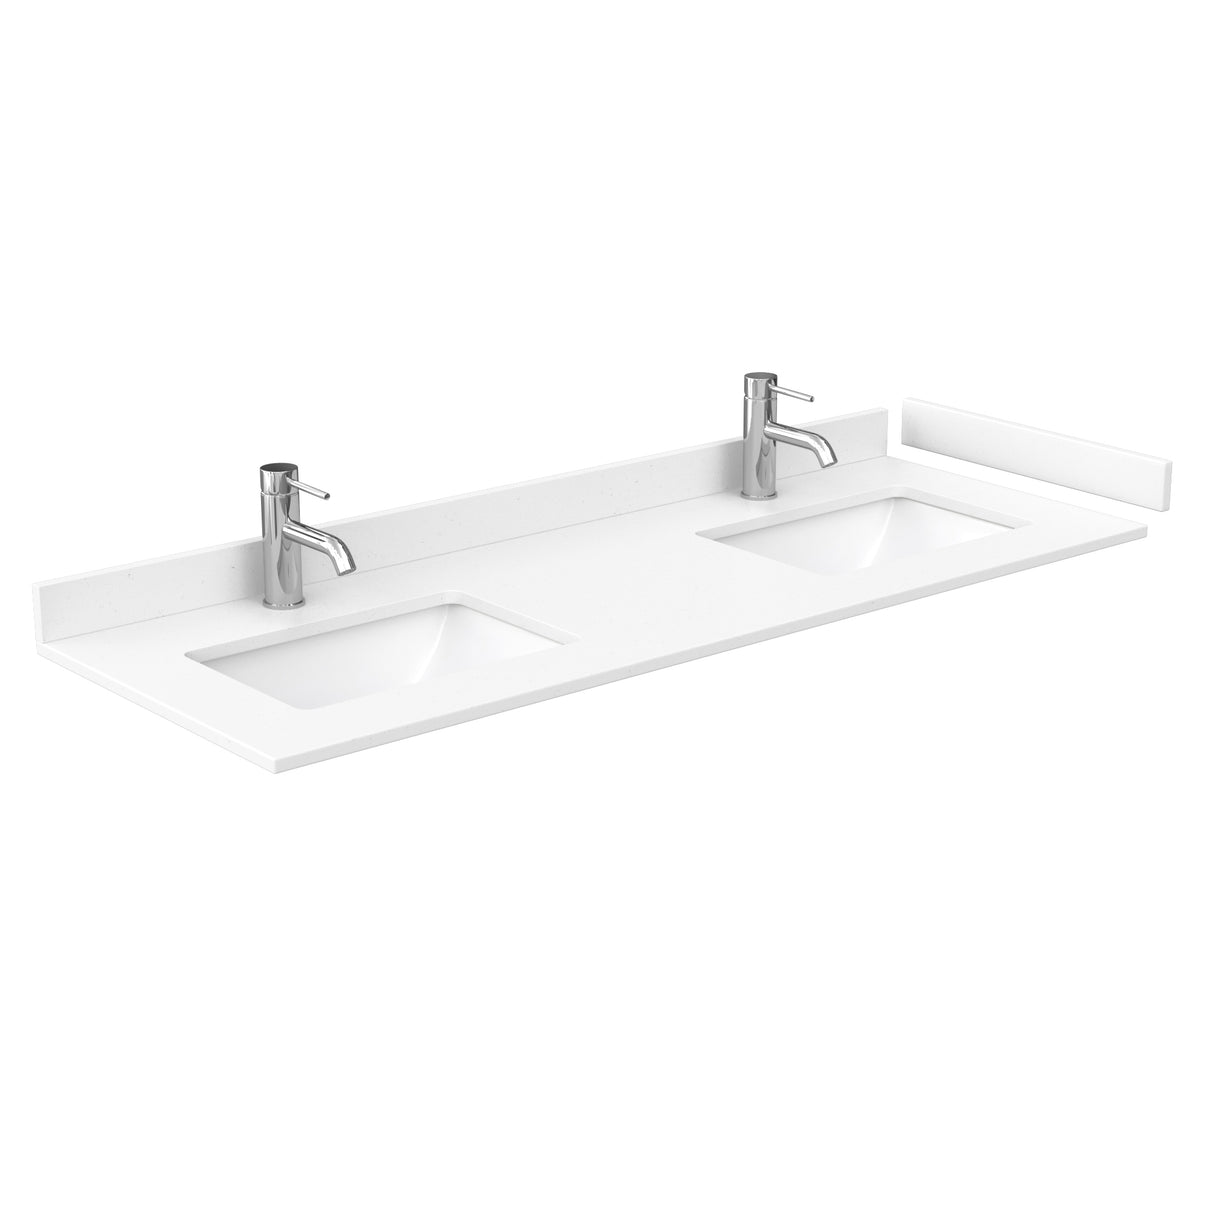 Miranda 60 Inch Double Bathroom Vanity in White White Cultured Marble Countertop Undermount Square Sinks Brushed Nickel Trim